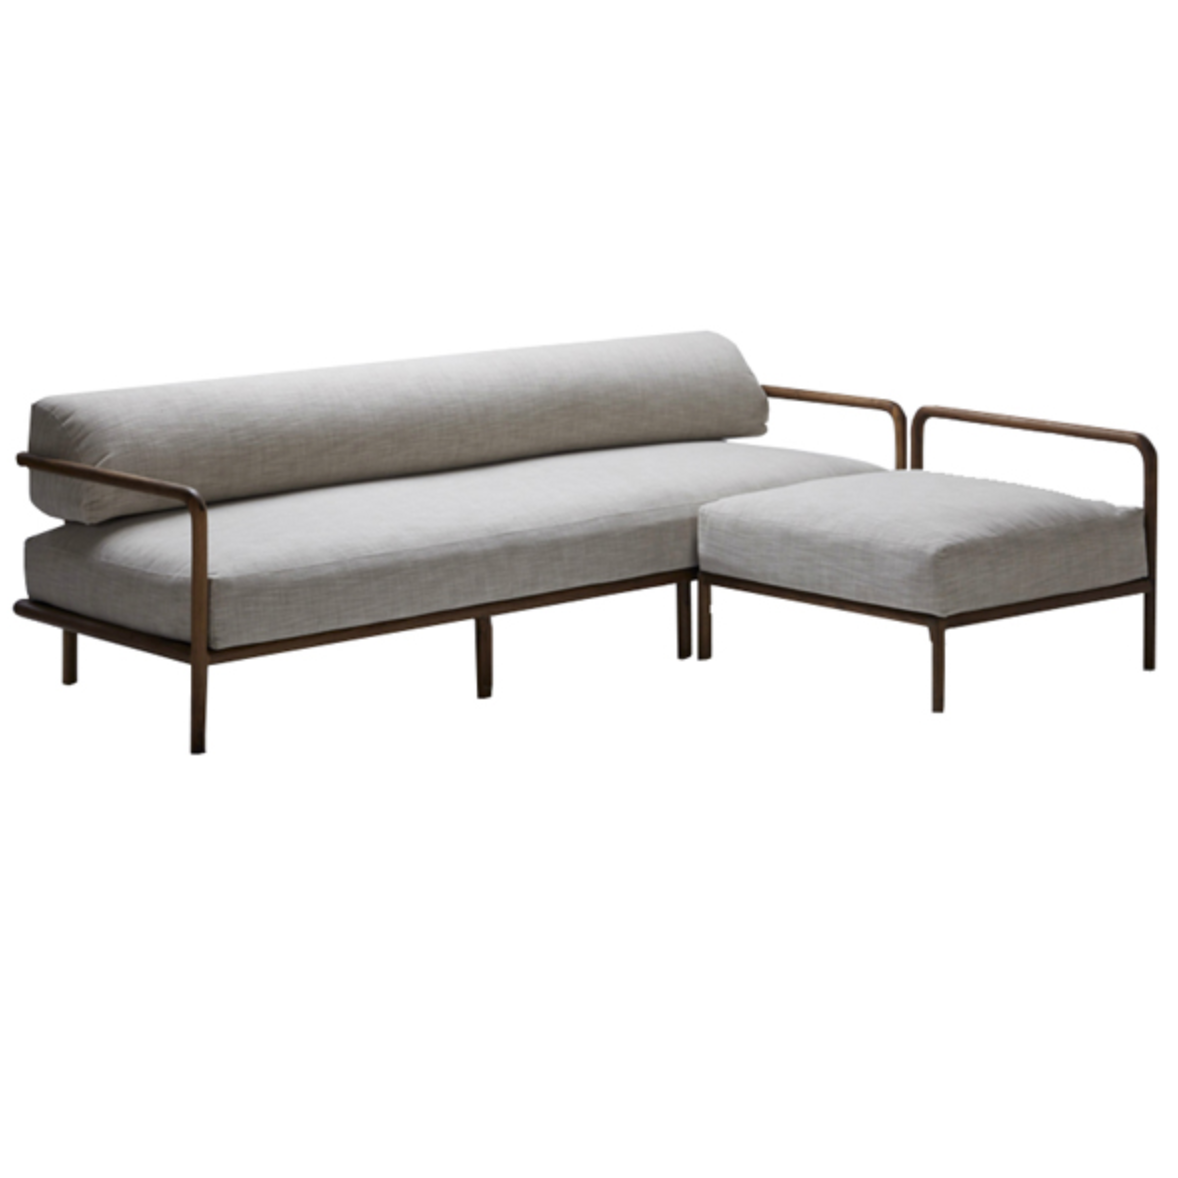 Melike L-Shaped Sofa by Meyer Von Wielligh. Inspired by the stark beauty of the Namibian landscape where Abrie grew up, the Melike sofa is an uncomplicated design imbued with a simplicity in both material and detail.